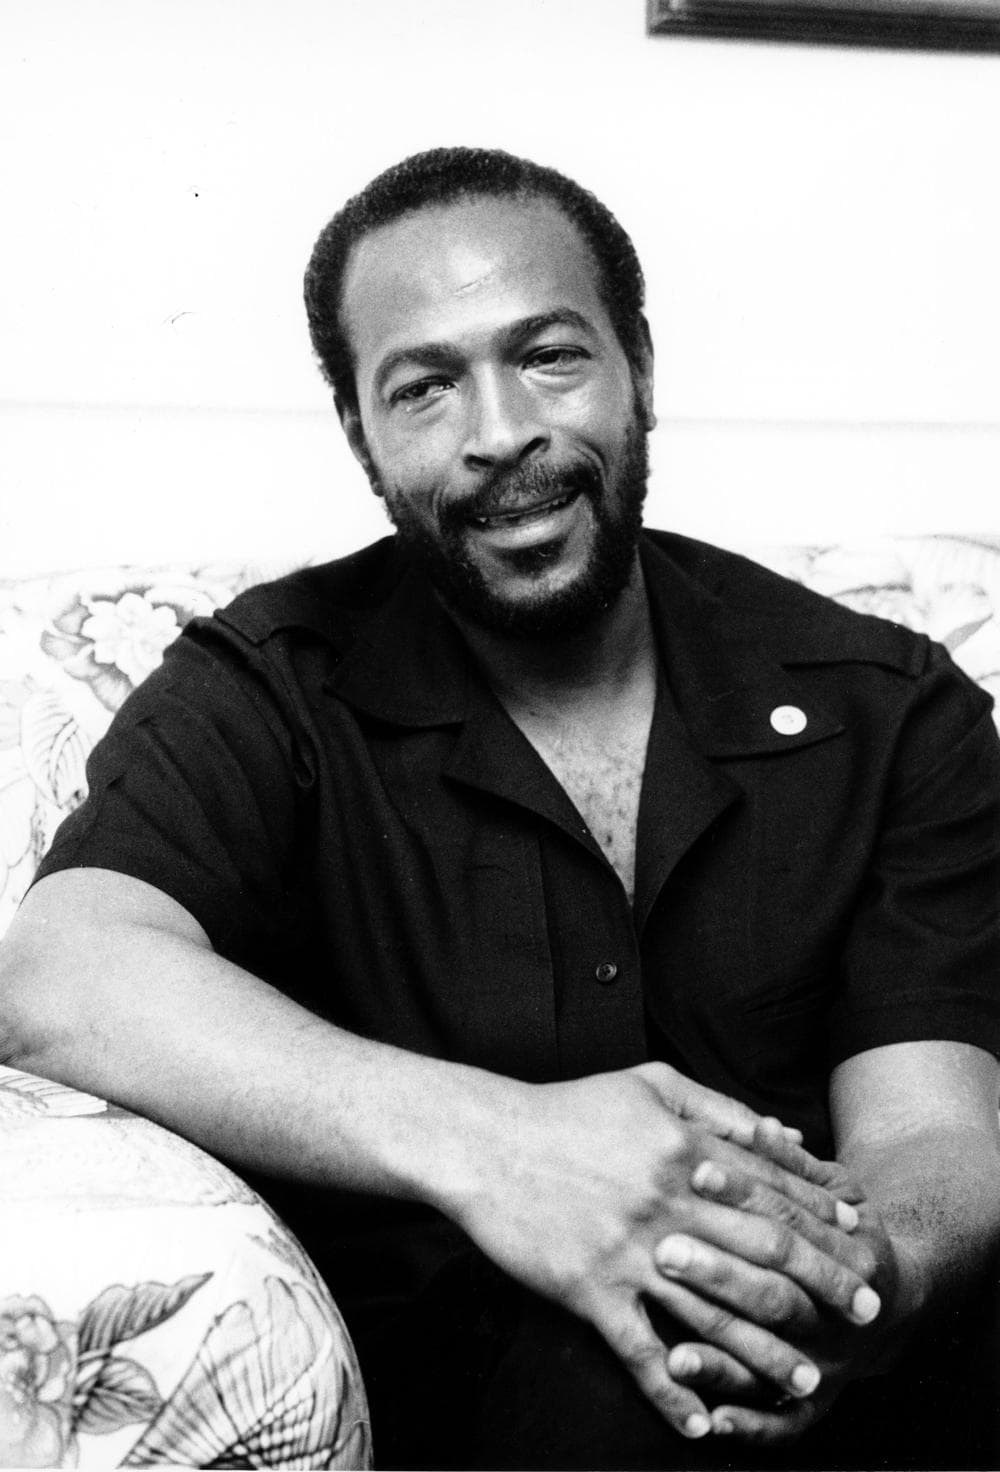 Soul singer Marvin Gaye in New York City in an undated photo. (AP)